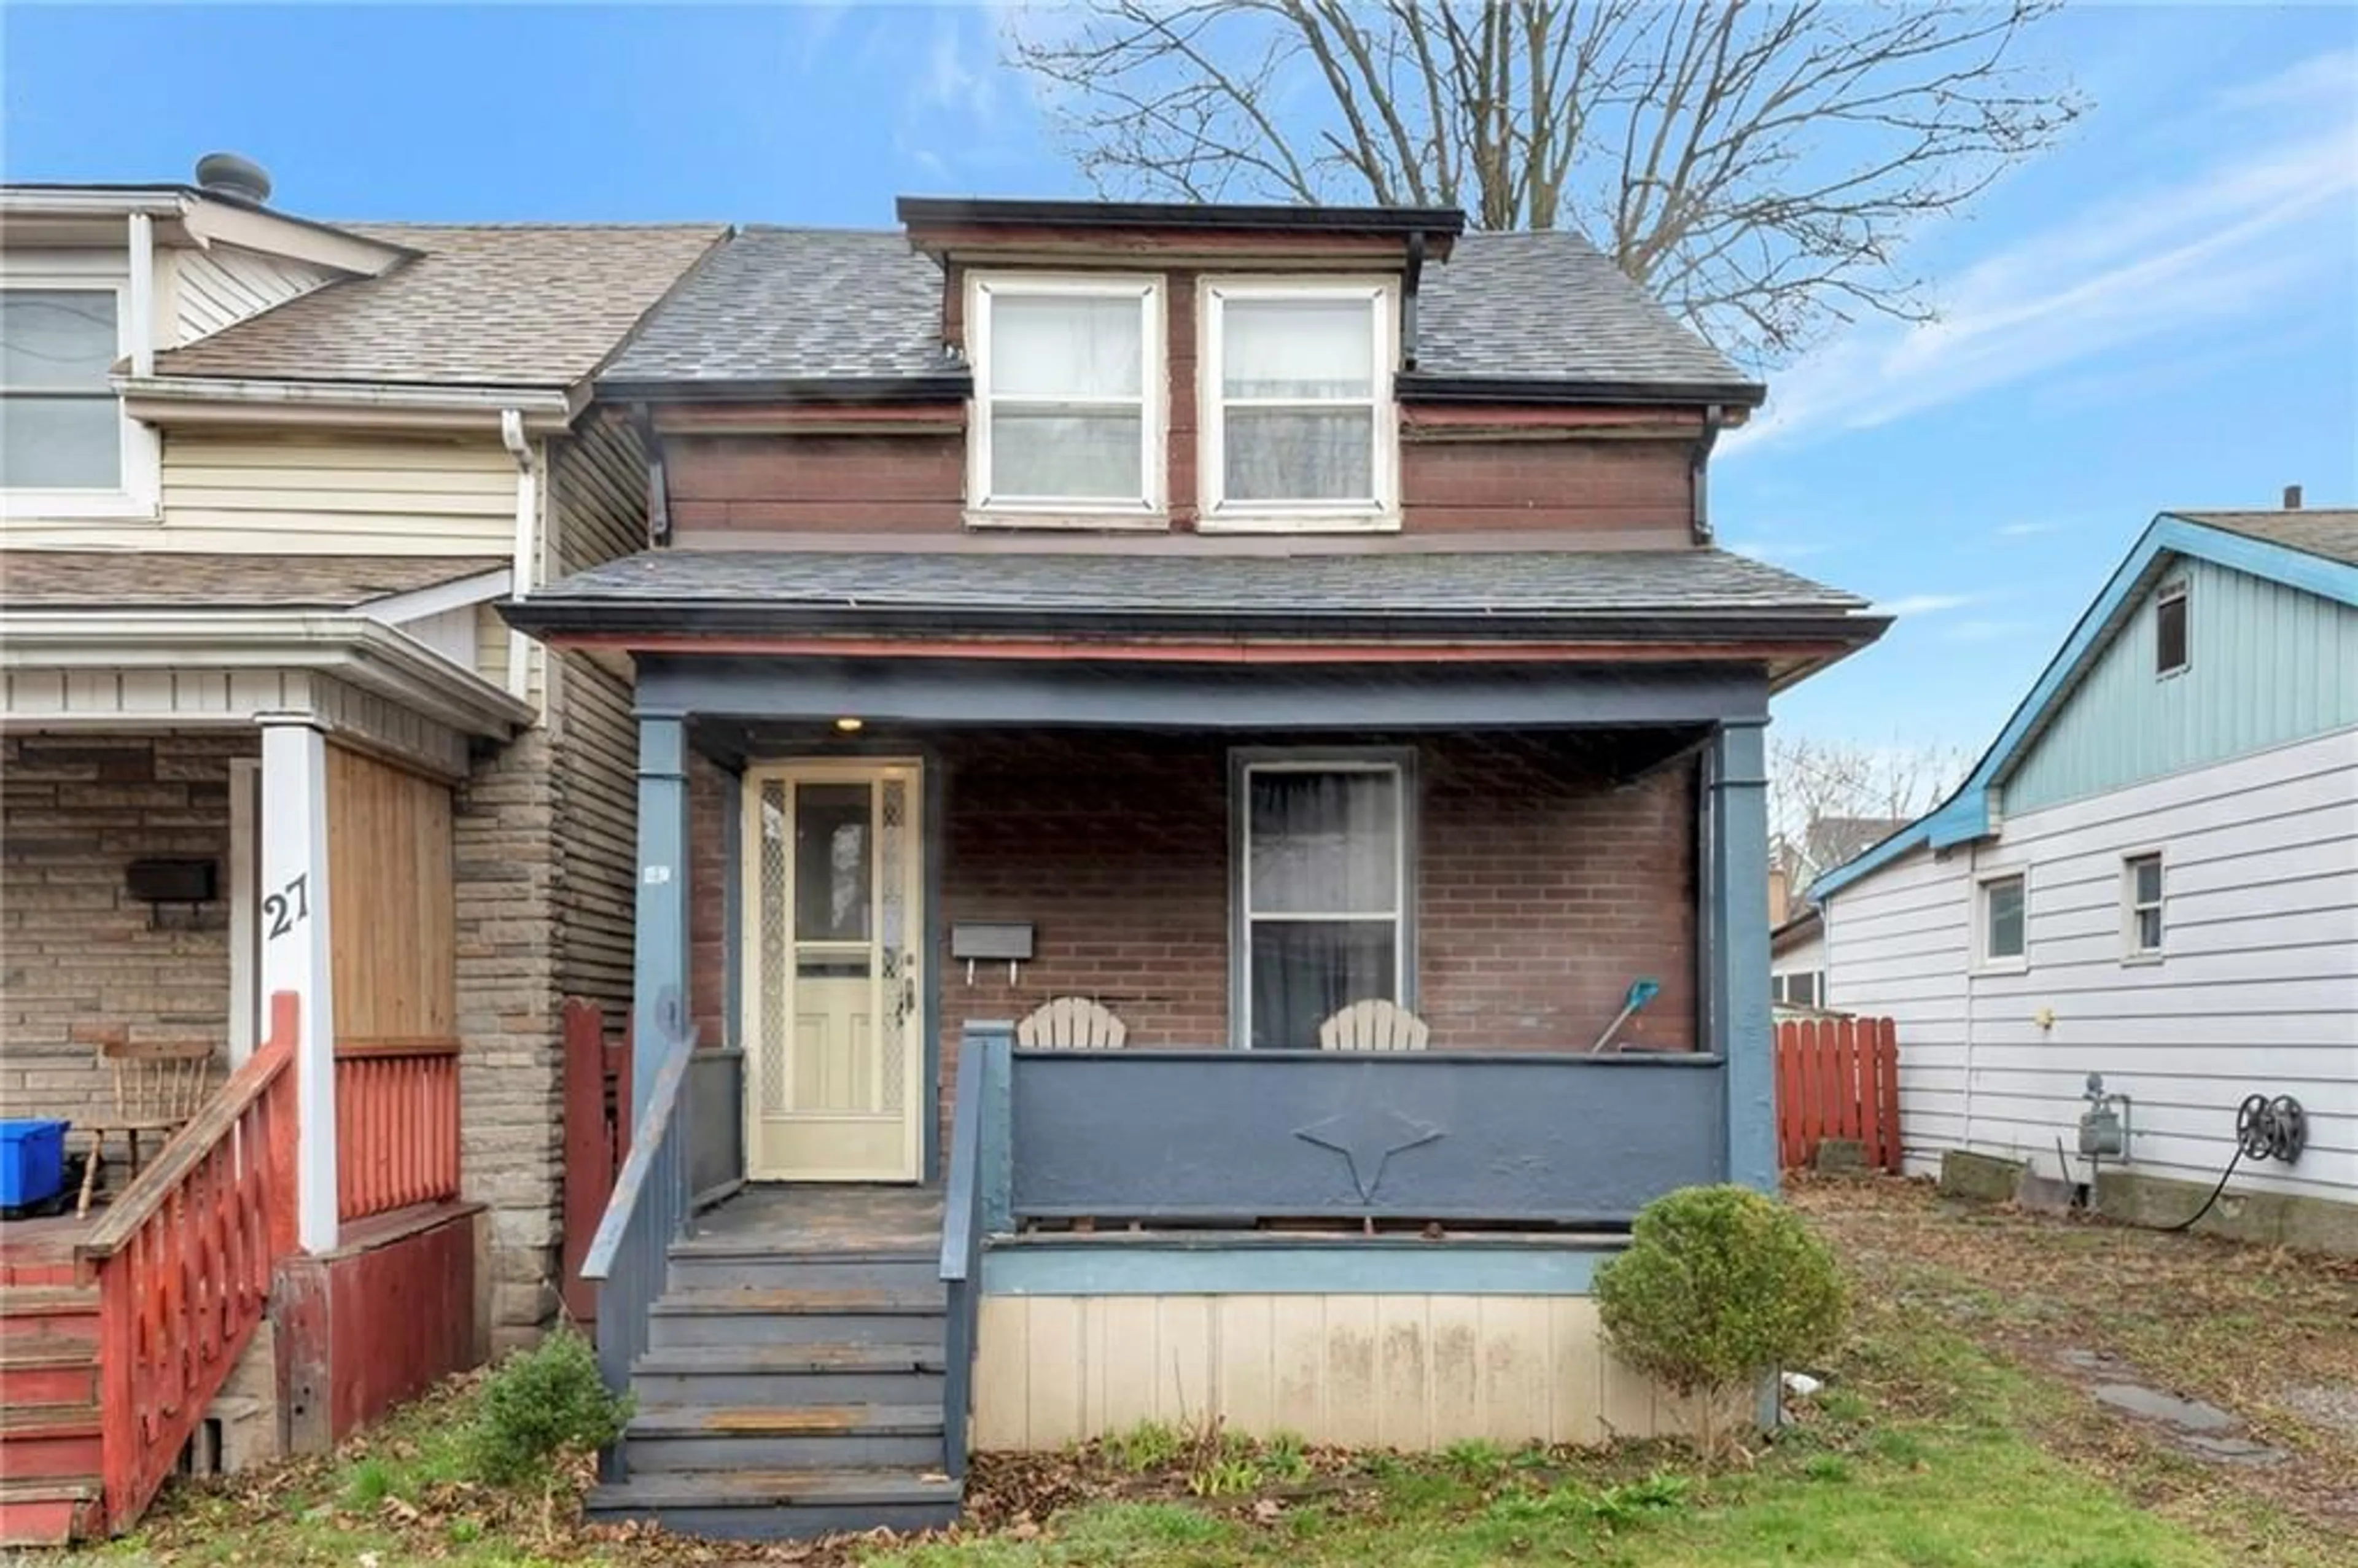 Frontside or backside of a home for 29 NEW St, Hamilton Ontario L8P 4J6